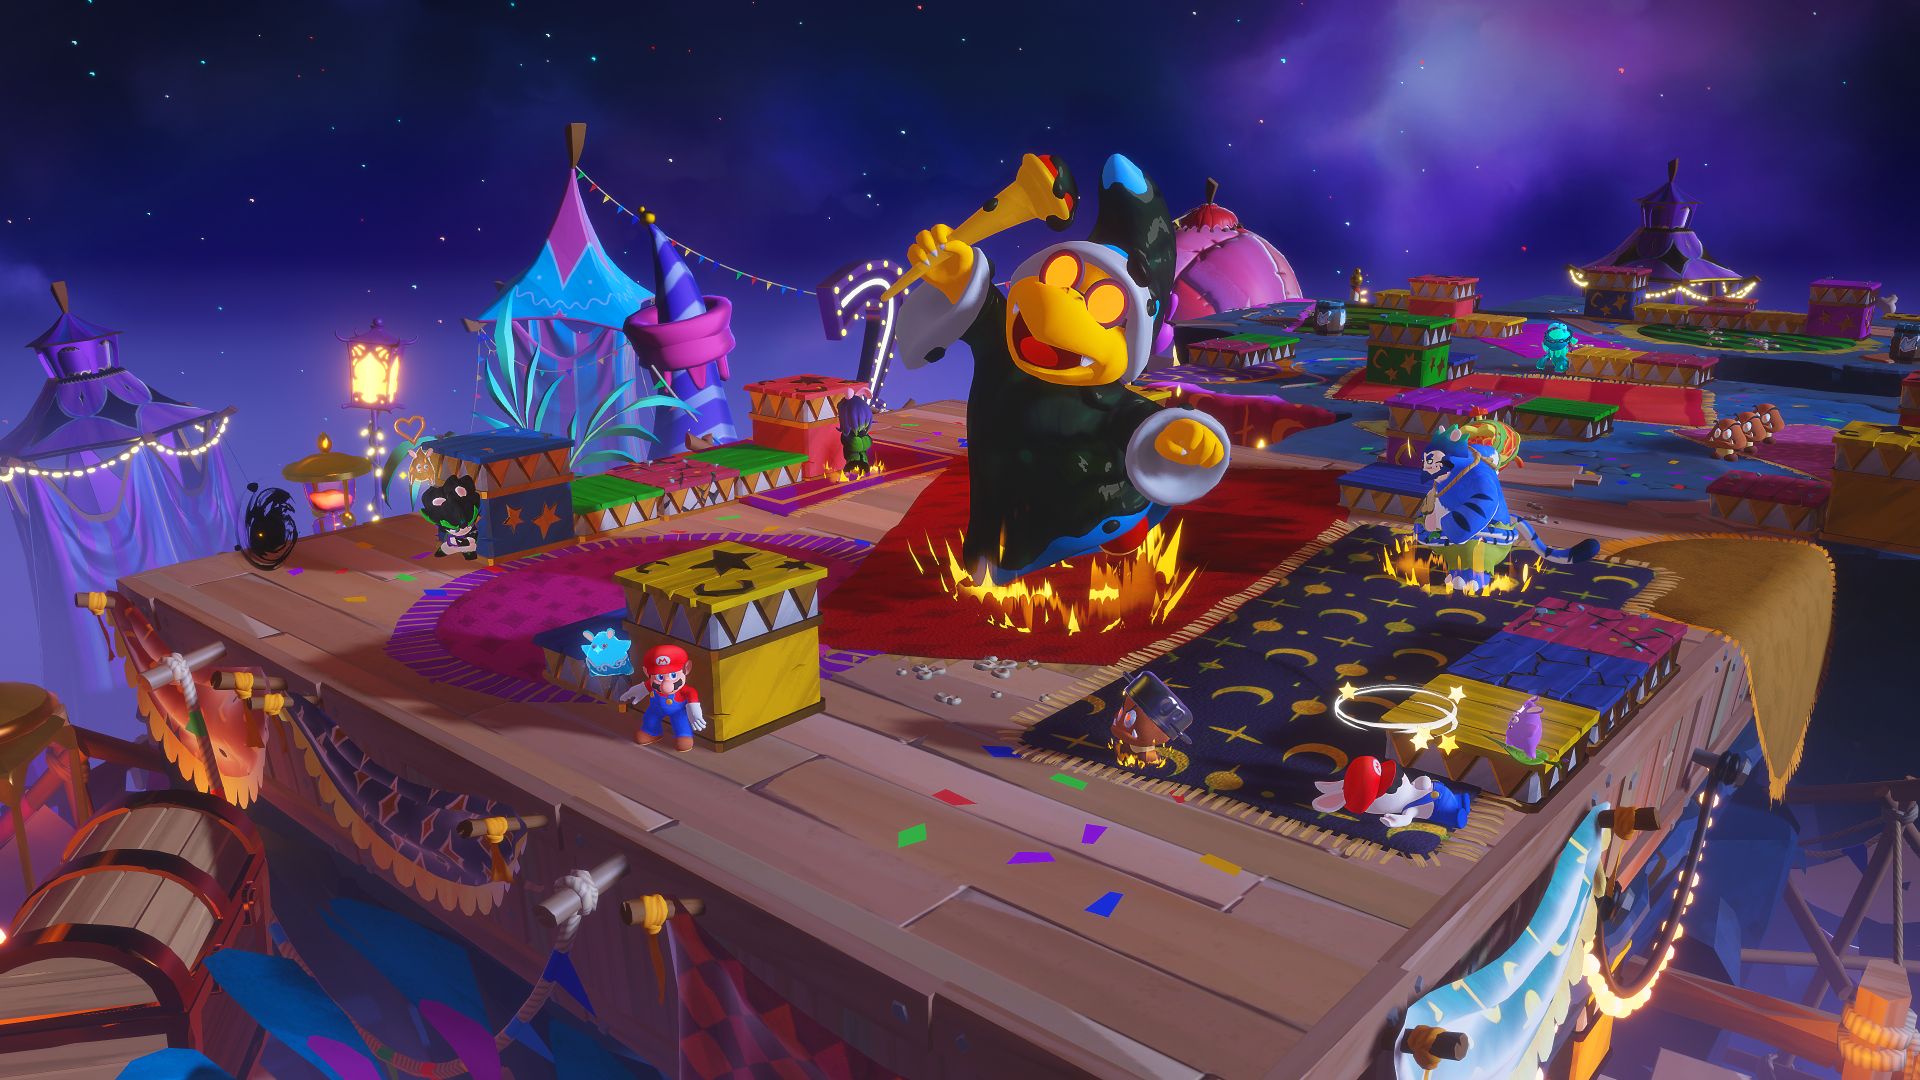 Mario + Rabbids Sparks of Hope – The Tower of Doooom DLC
Receives New Trailer Ahead of Launch